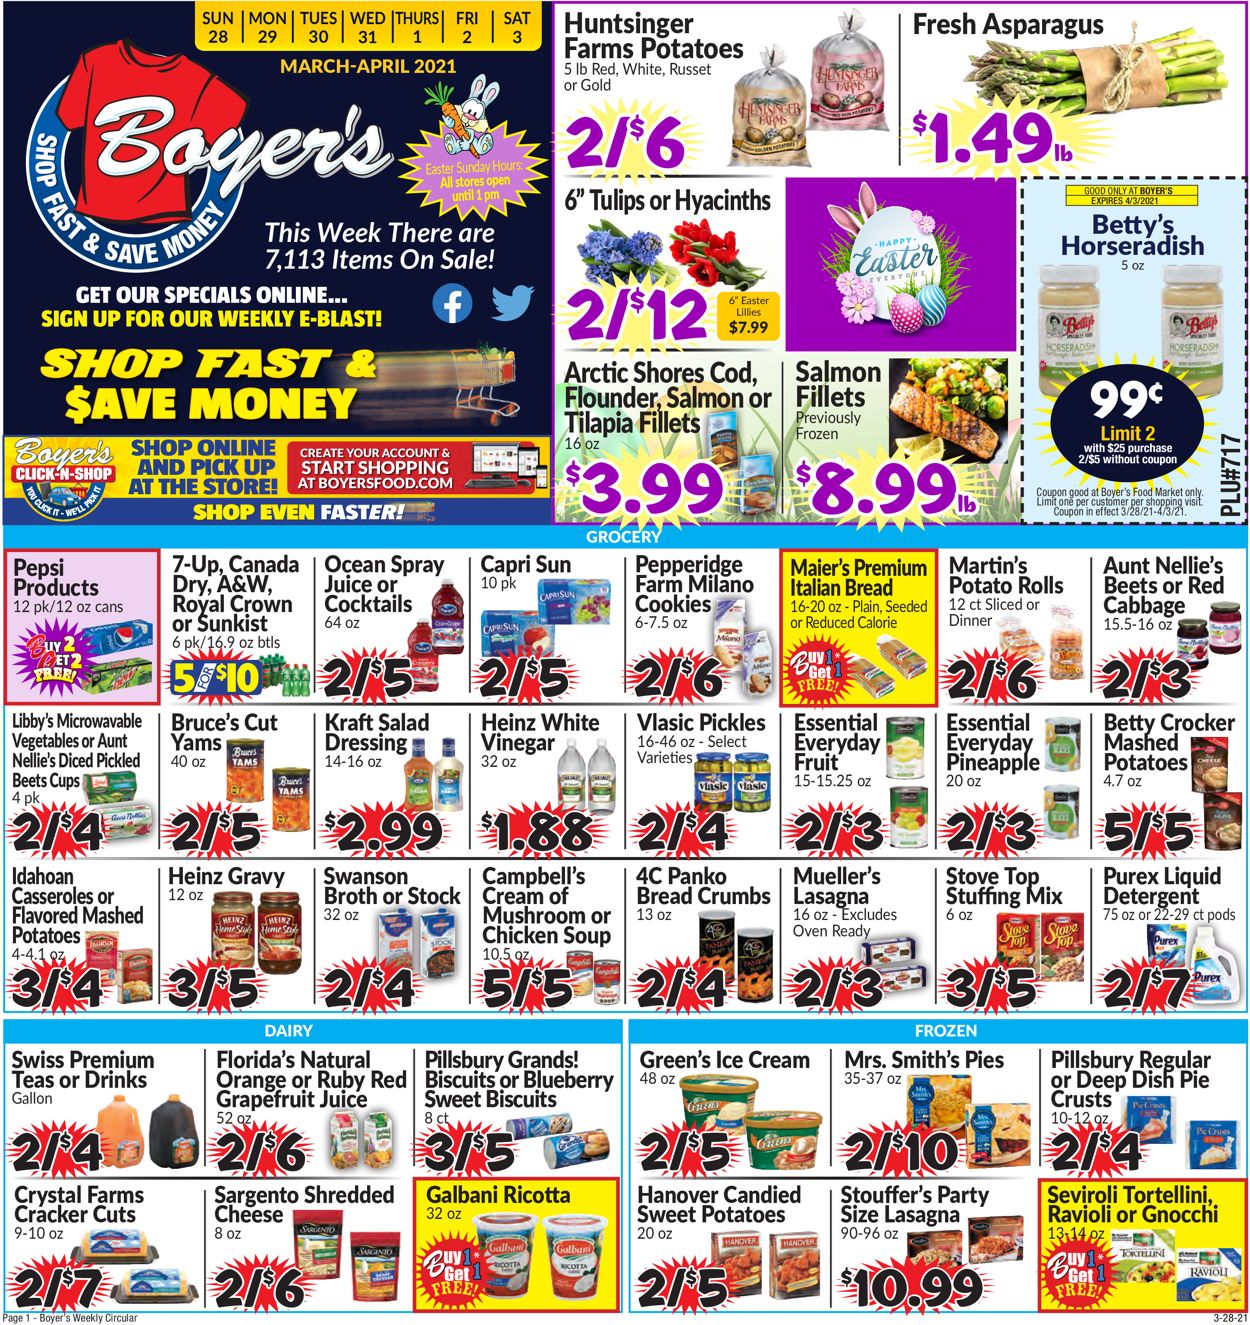 Boyer's Food Markets - Easter 2021 ad Weekly Ad Circular - valid 03/28-04/03/2021 (Page 3)